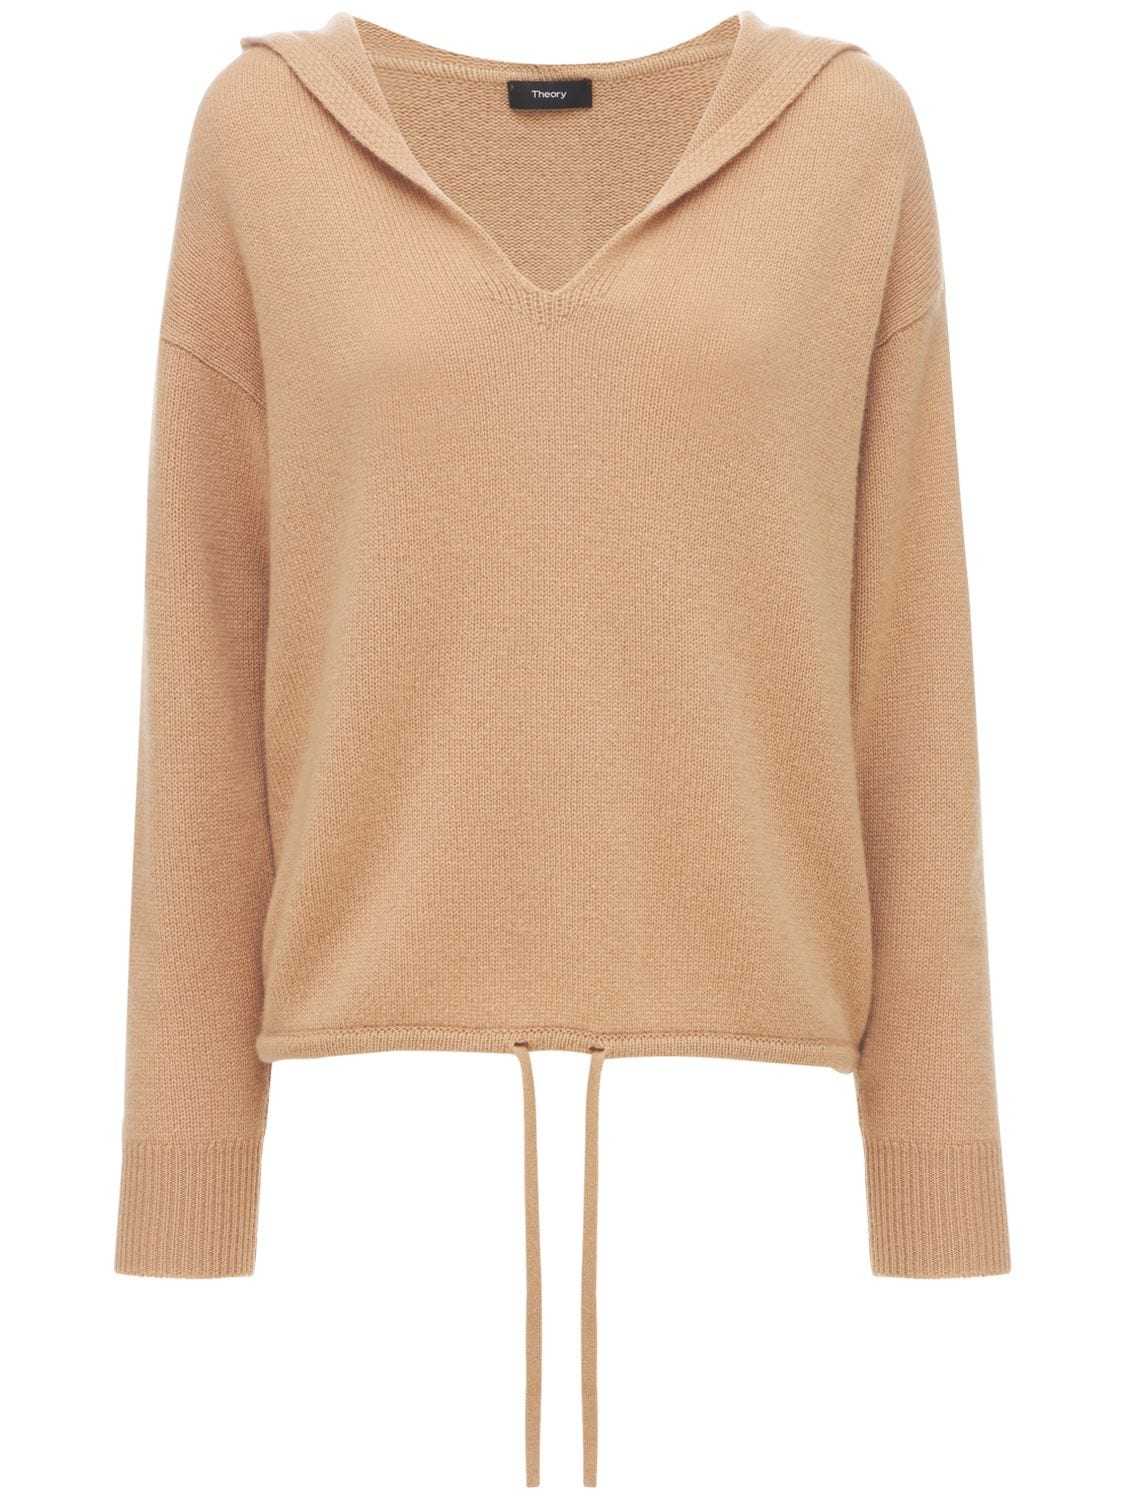 Relaxed Fit Cashmere Knit Hooded Sweater